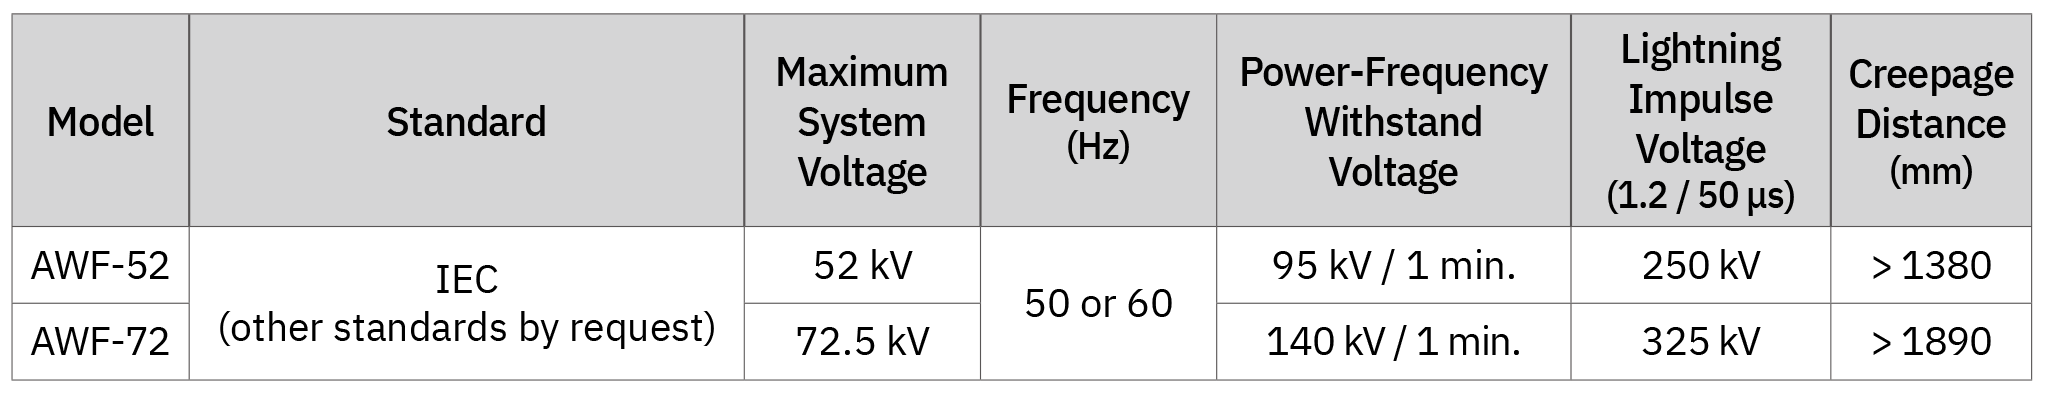 Outdoor High-Voltage Current Transformers - Electrical Specifications